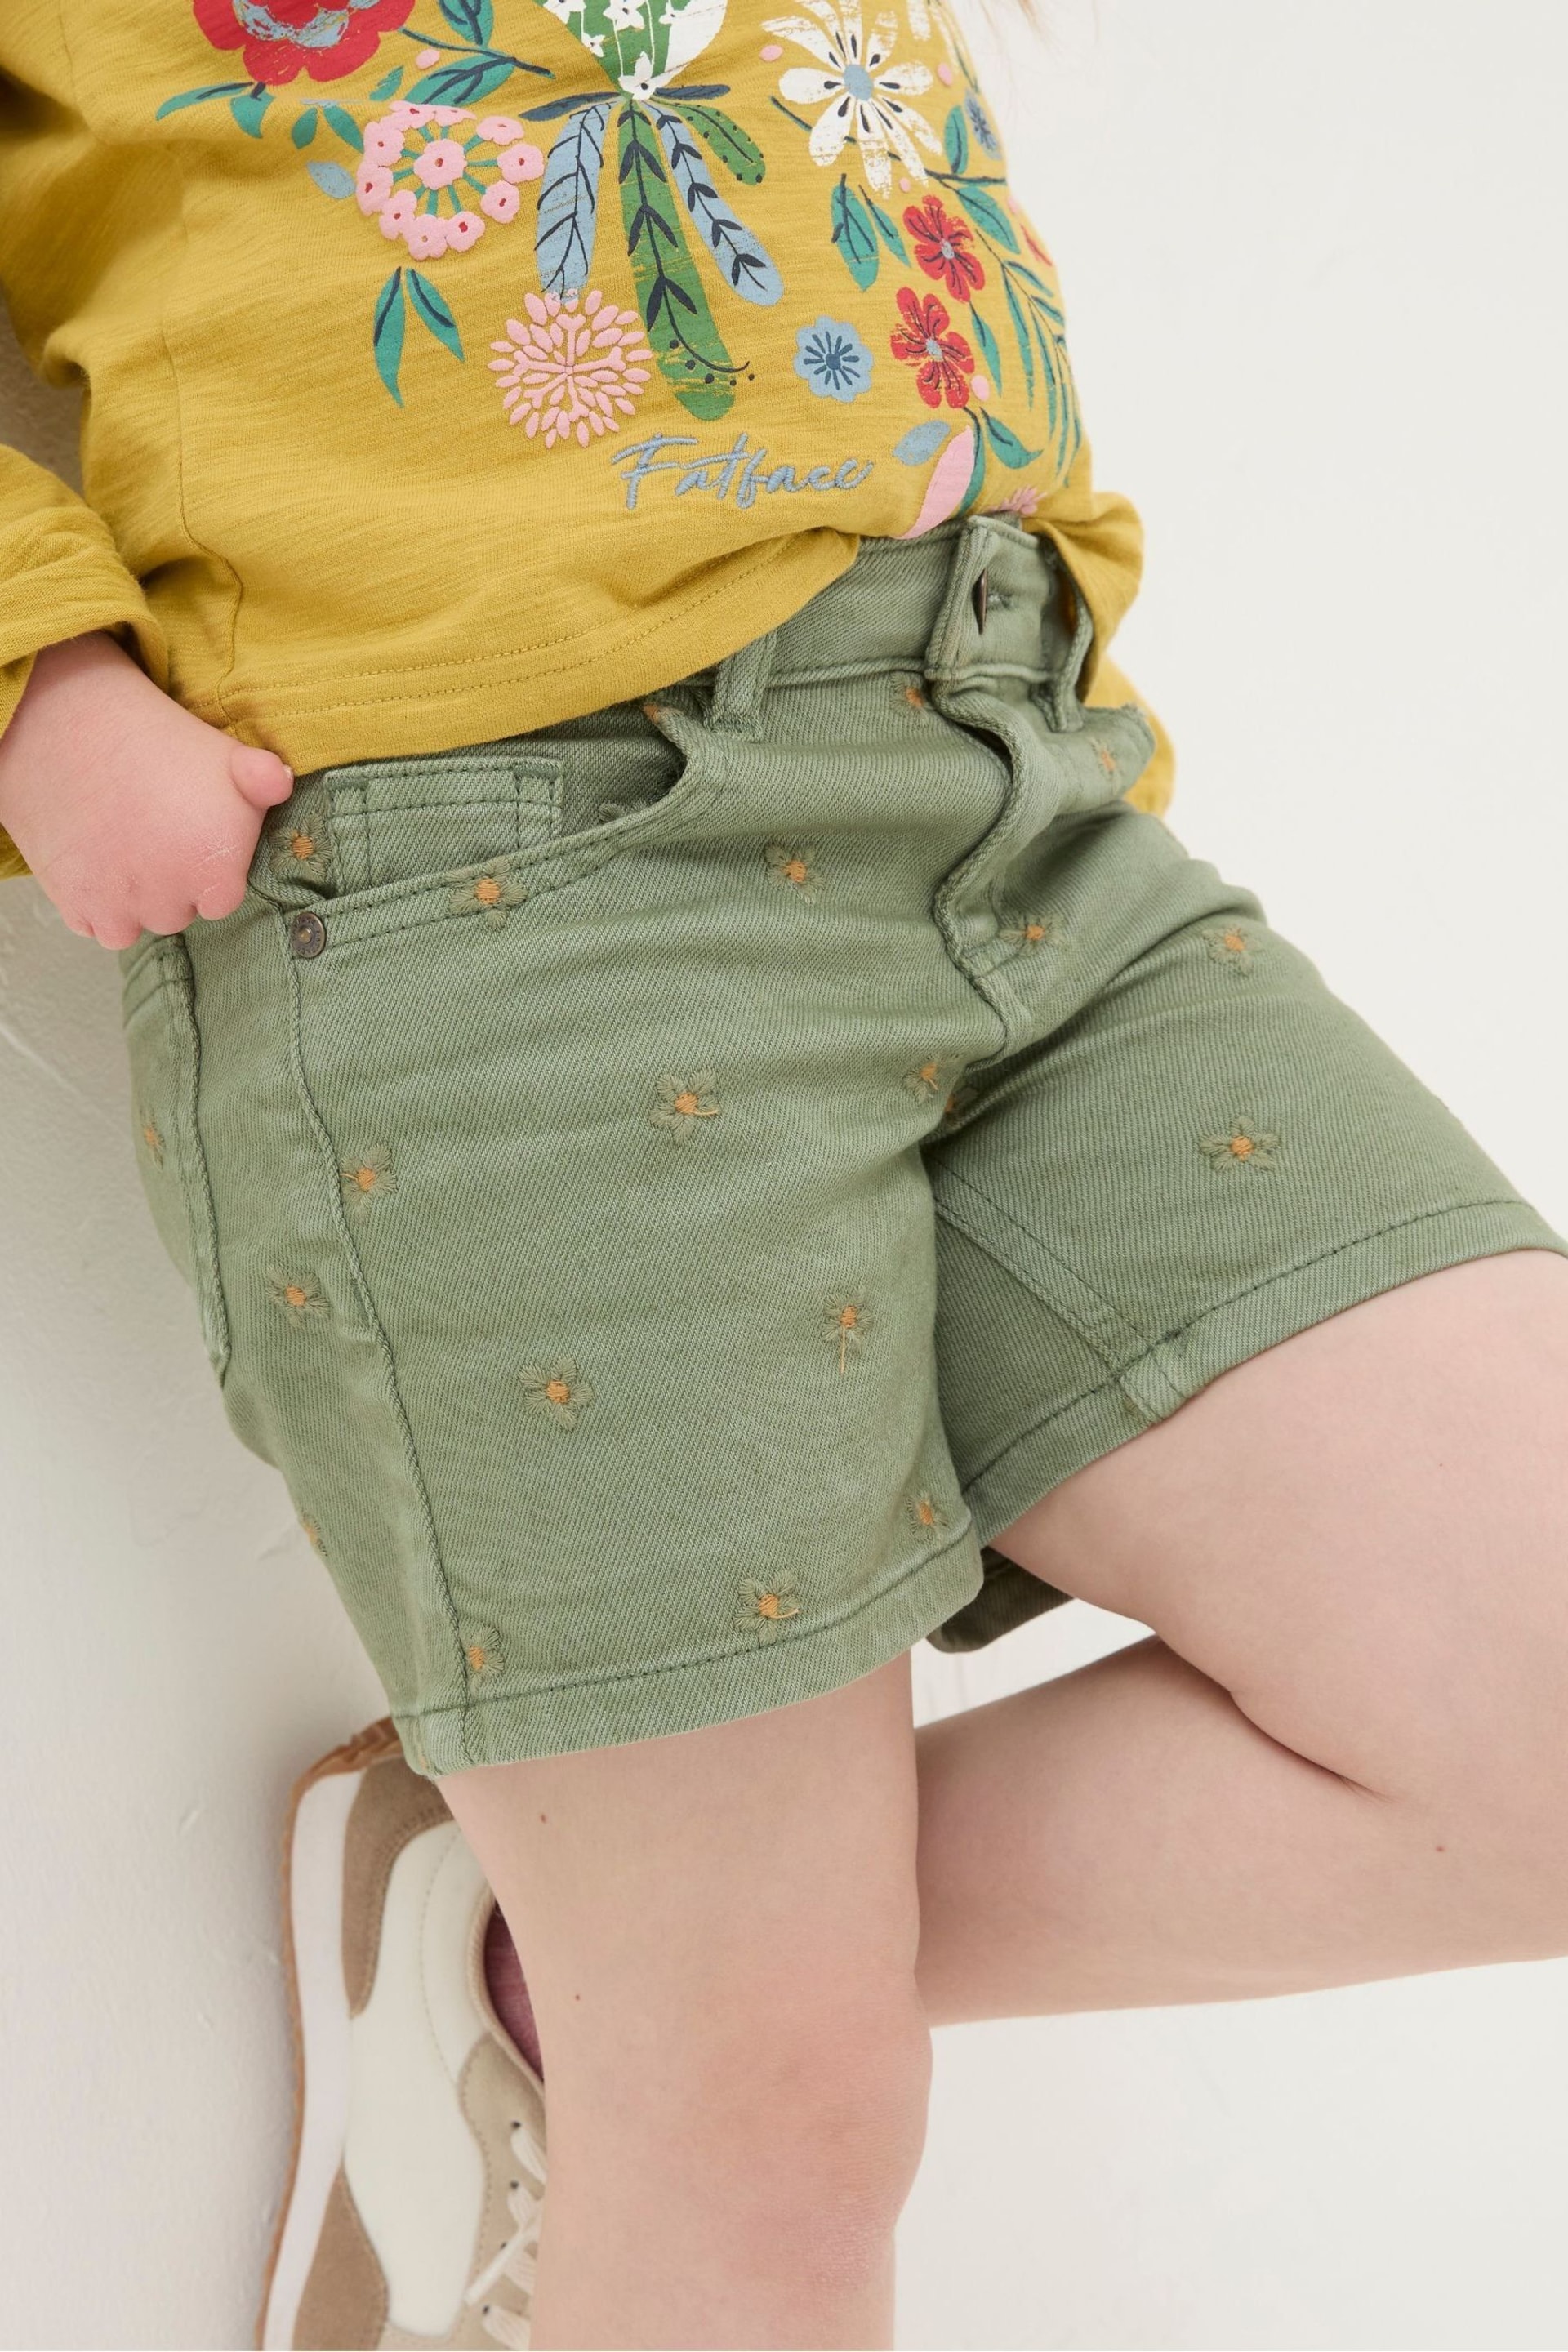 FatFace Green Daisy Embroidered Denim Shorts - Image 3 of 4